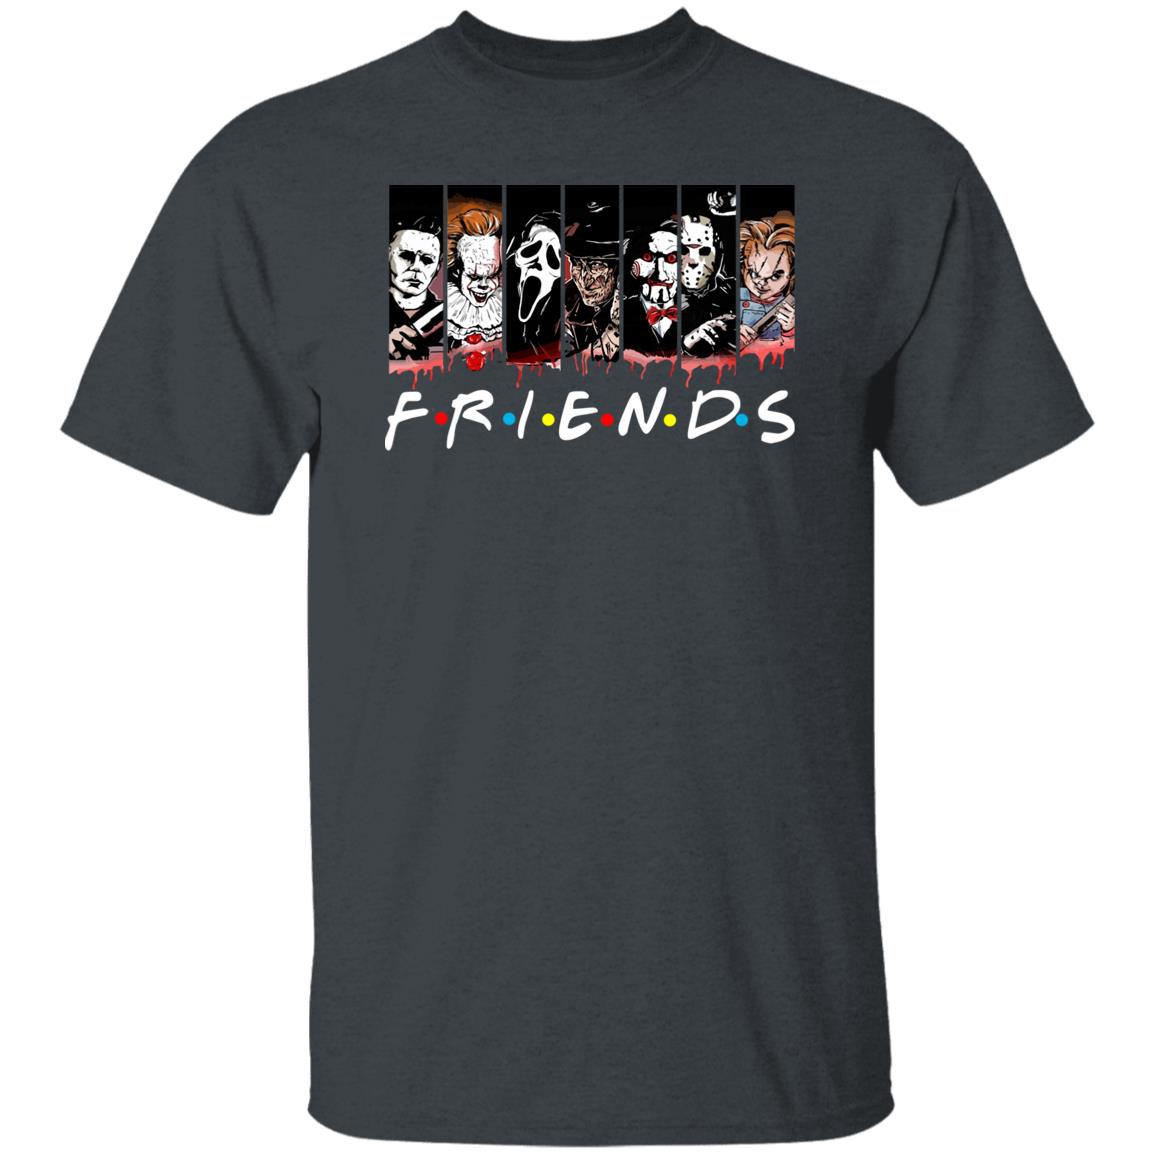 Friends Horror Movie Characters Shirt for Halloween